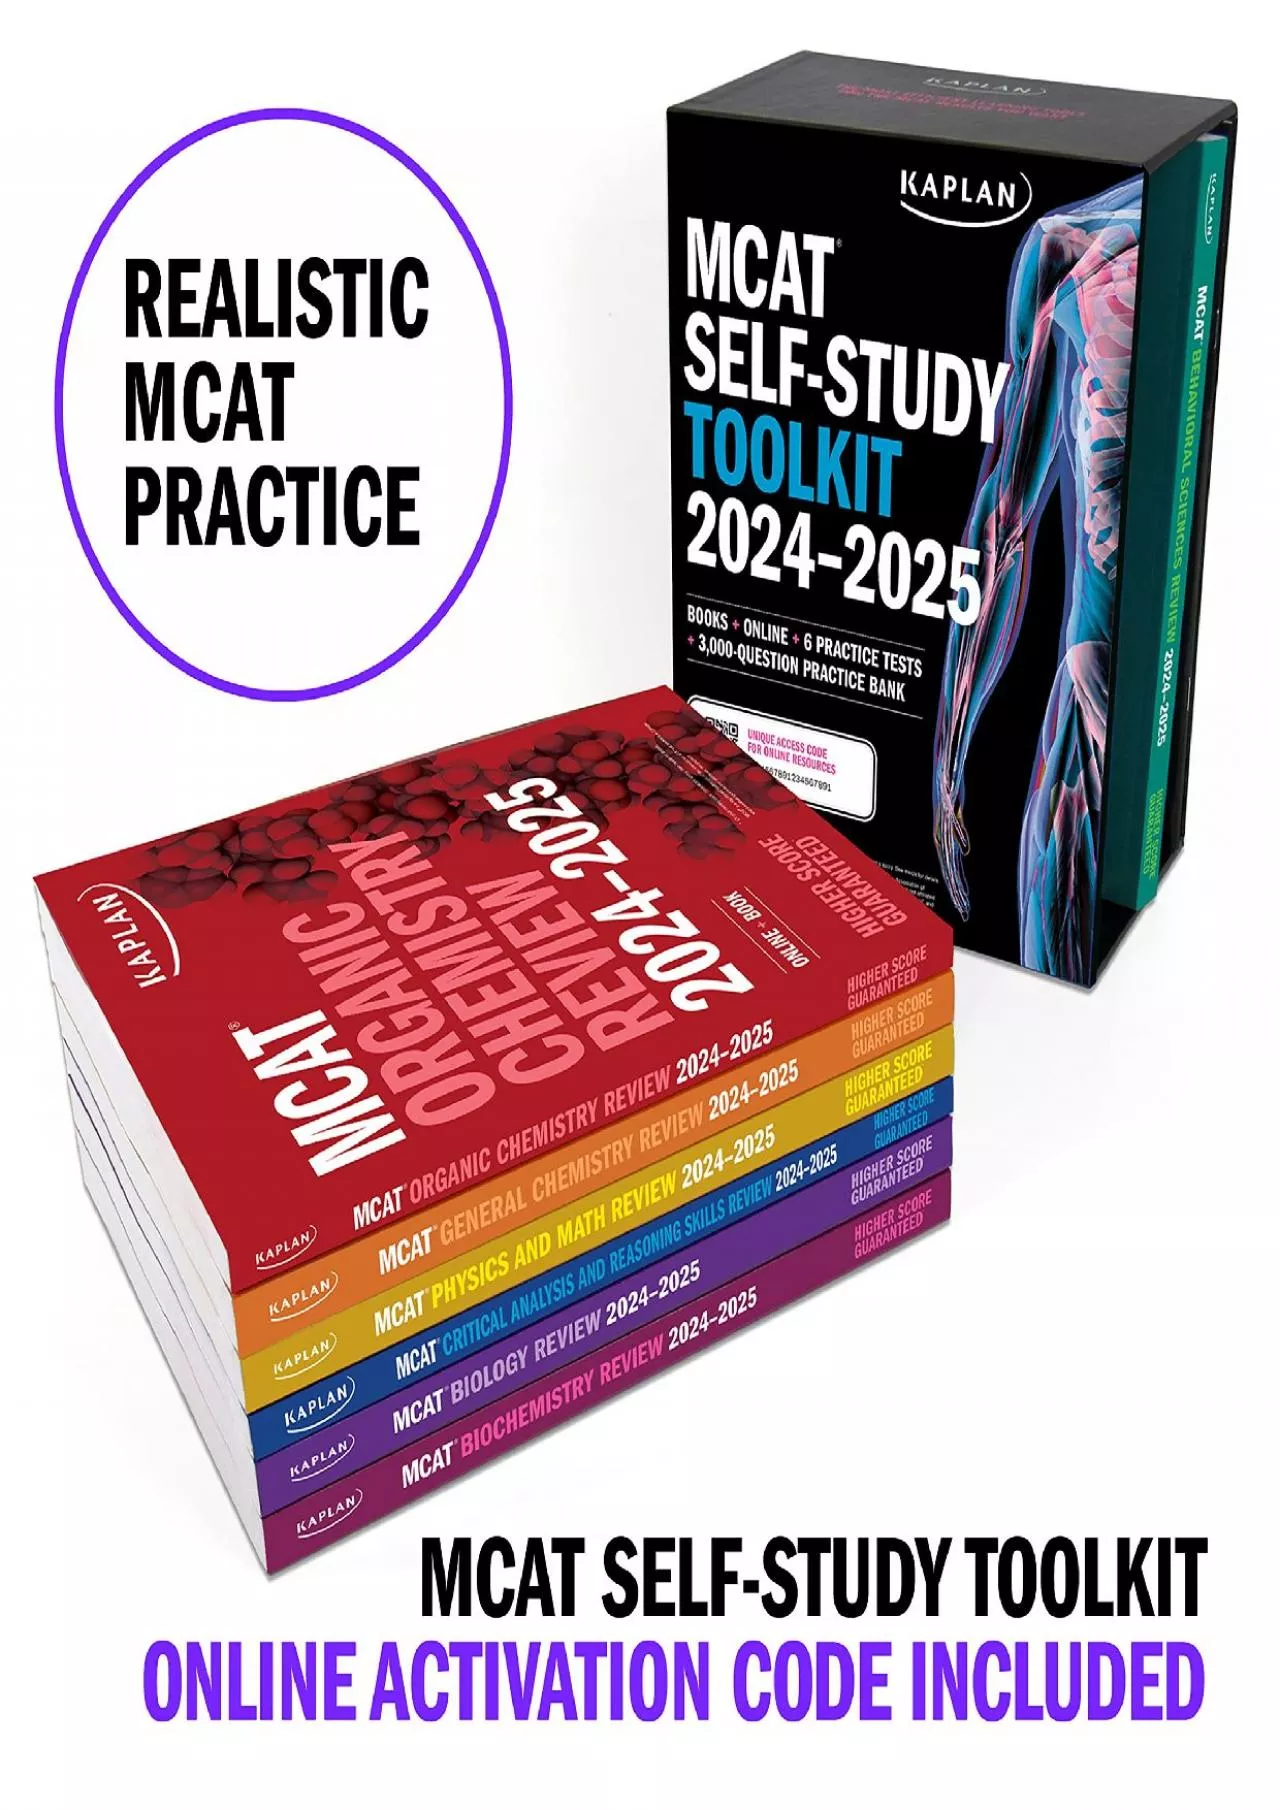 [READ] MCAT Self-Study Toolkit 2024-2025: Includes MCAT Complete 7 Book Set, 6 Full Length